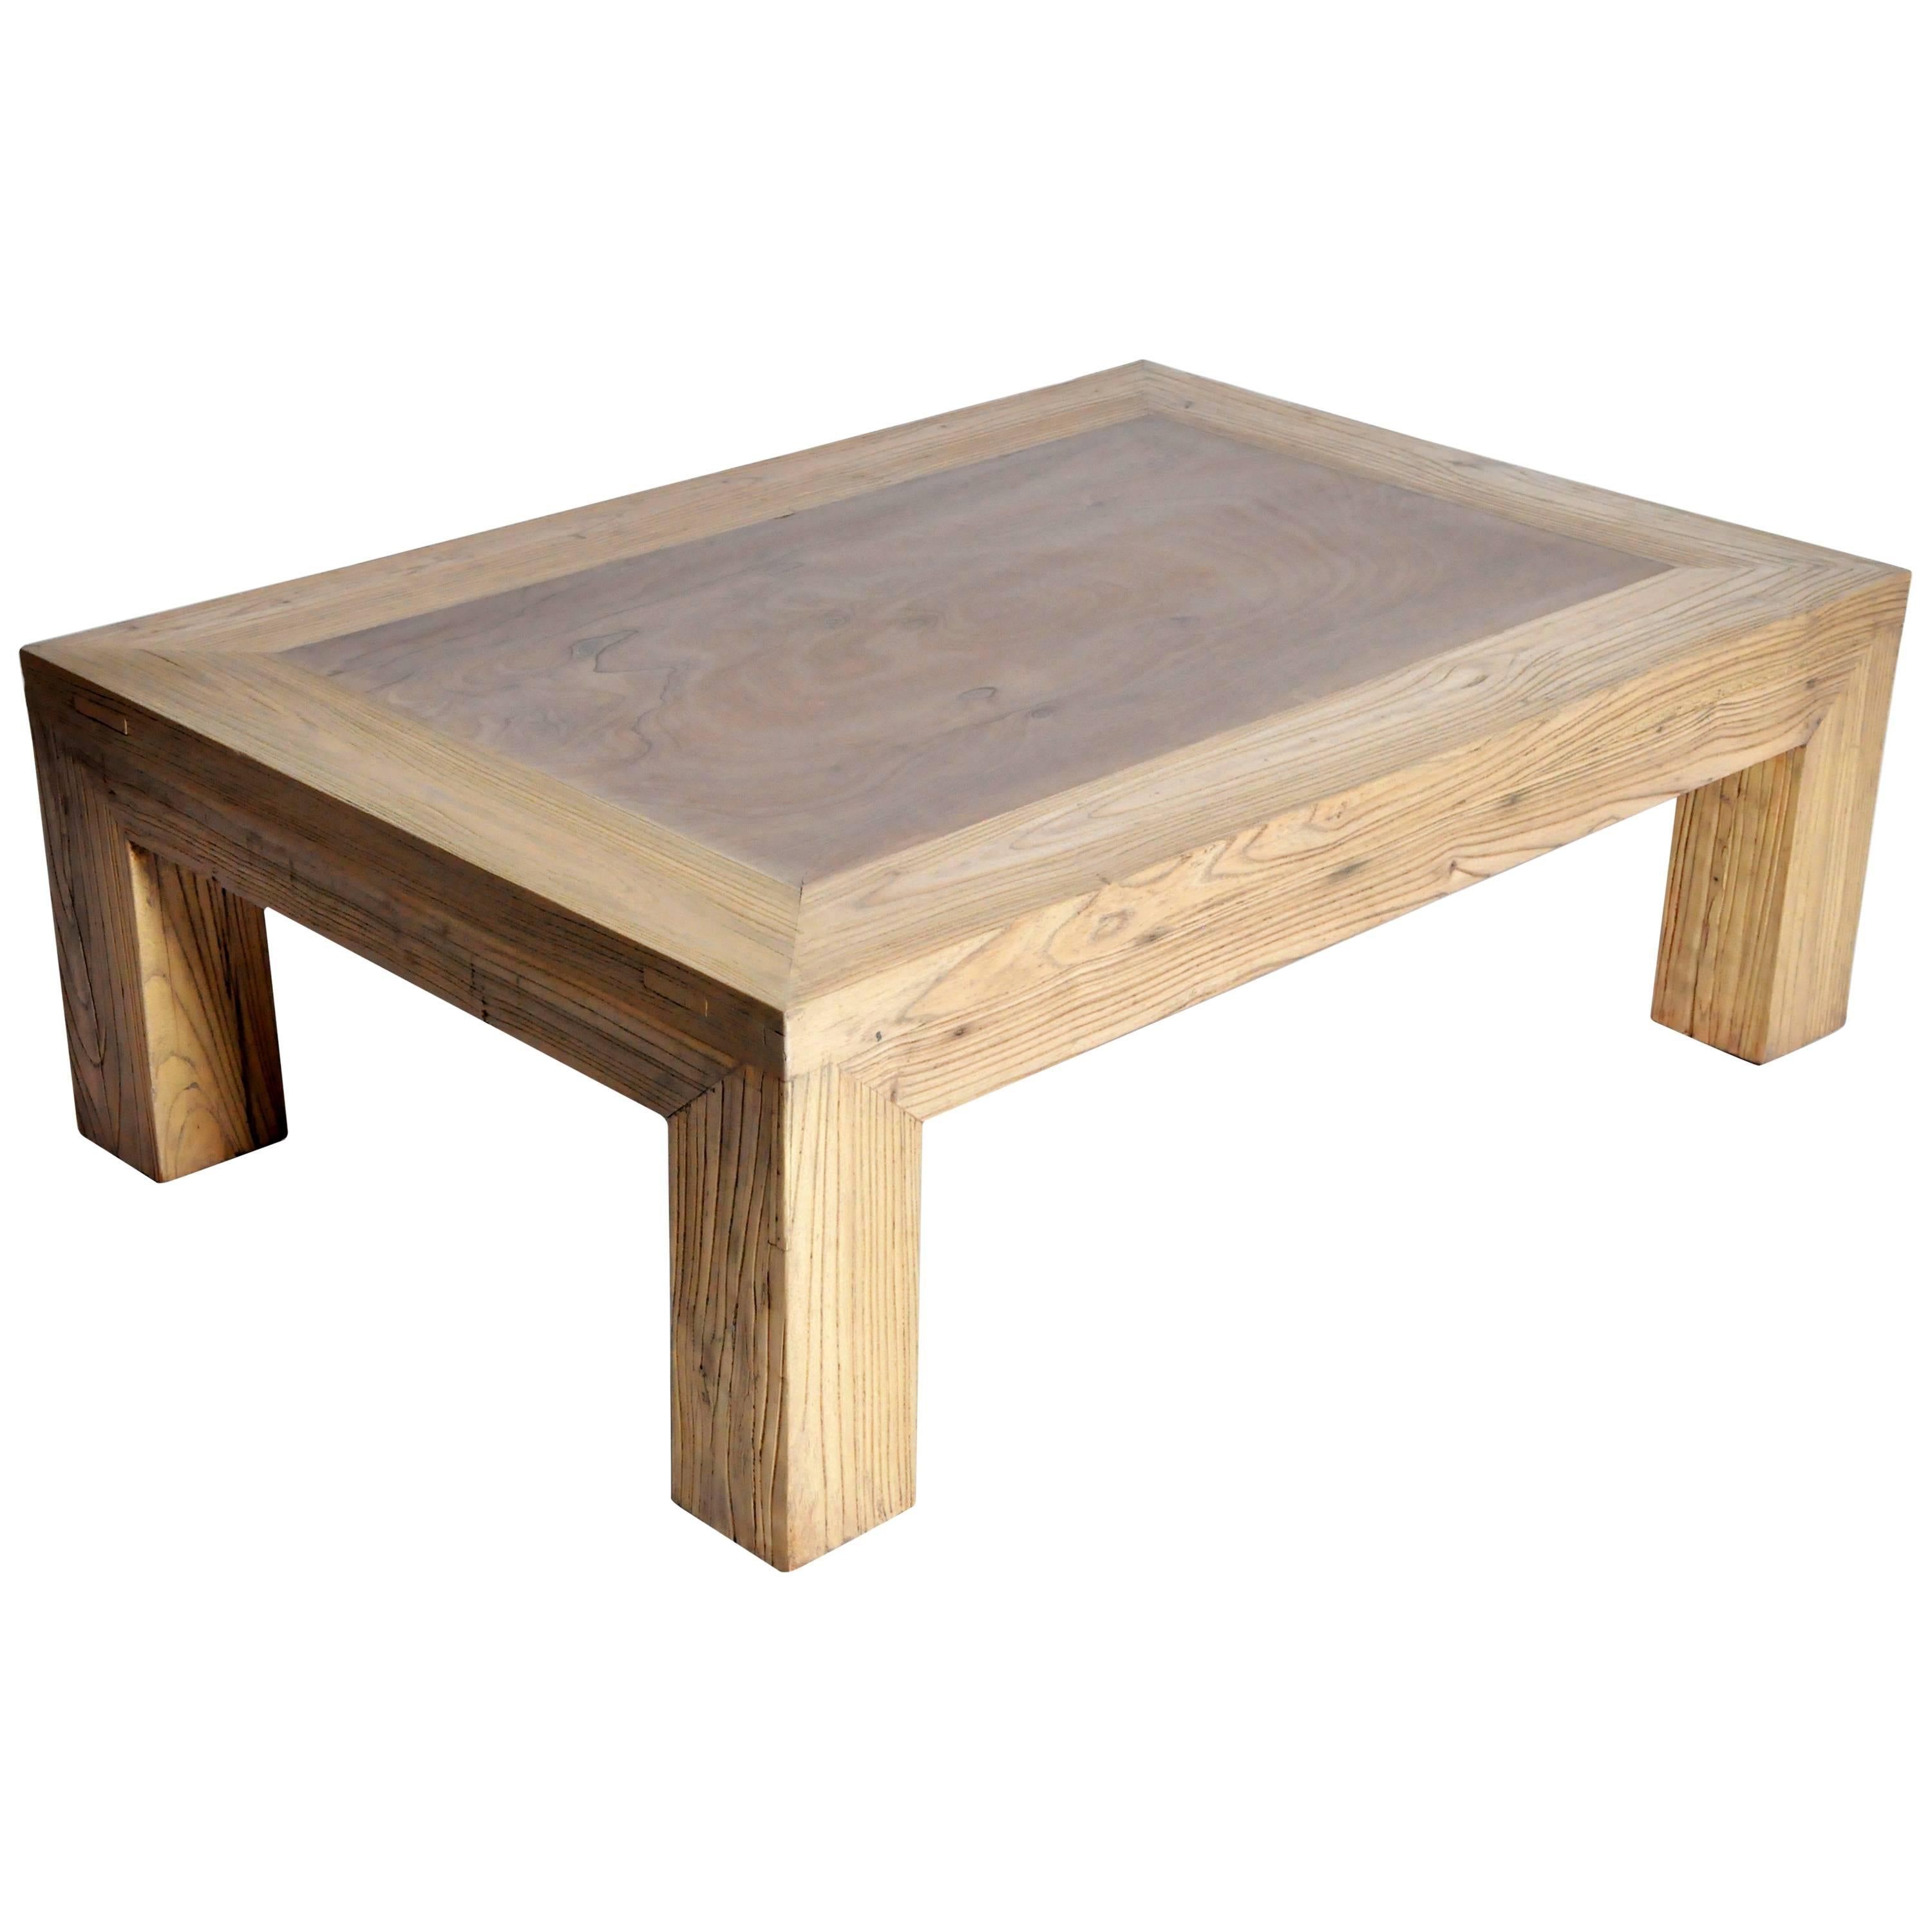 GT Atelier Modern Low Table with Sandstone Inset Top